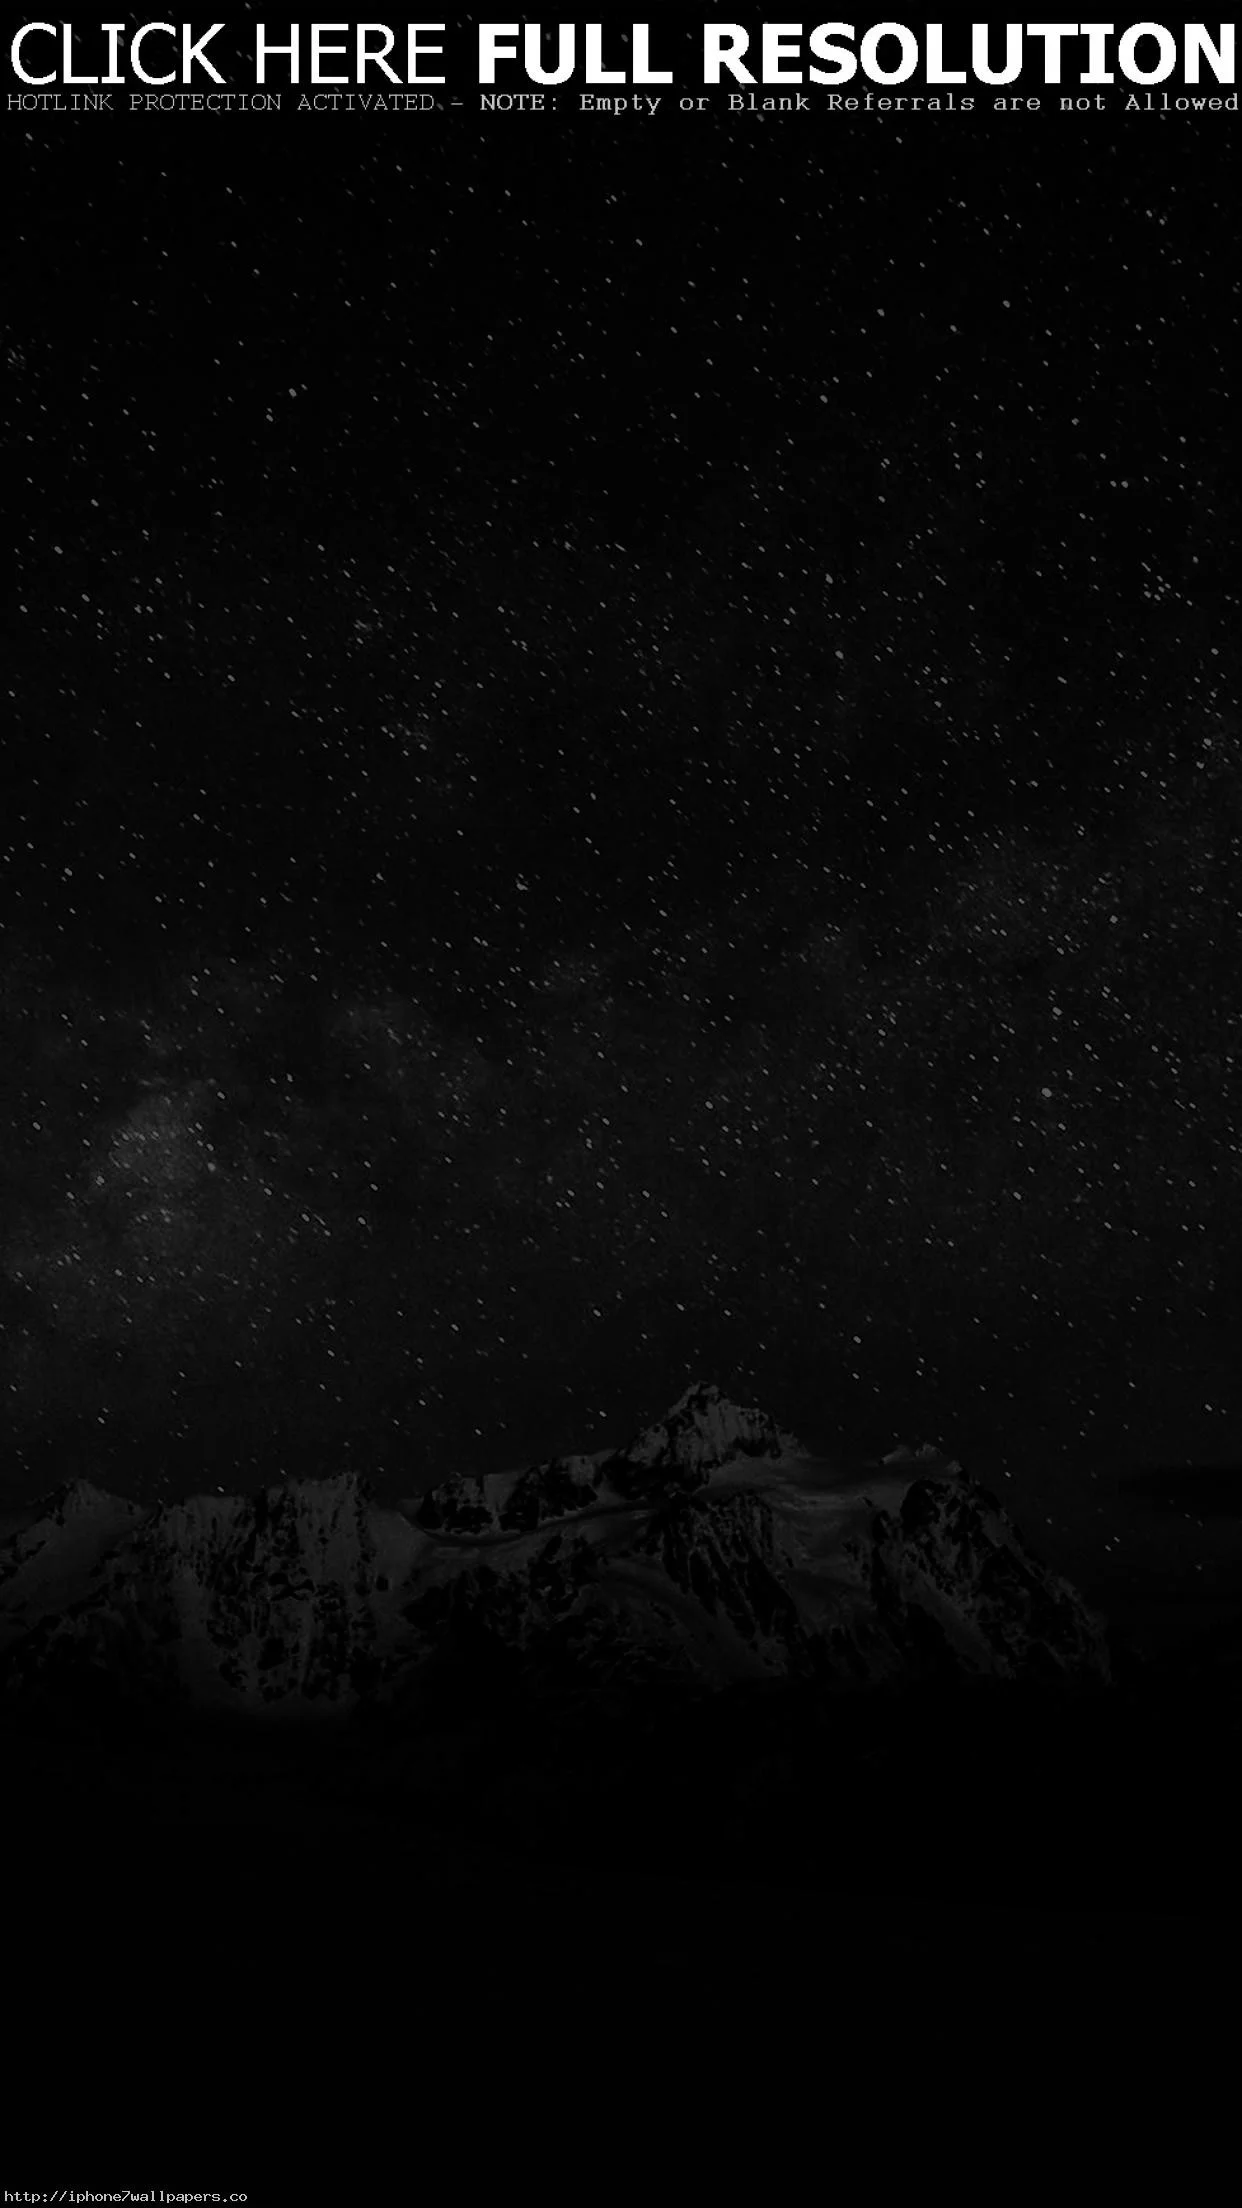 Starry Night Sky Mountain Nature Bw Dark Android wallpaper – Android HD  wallpapers